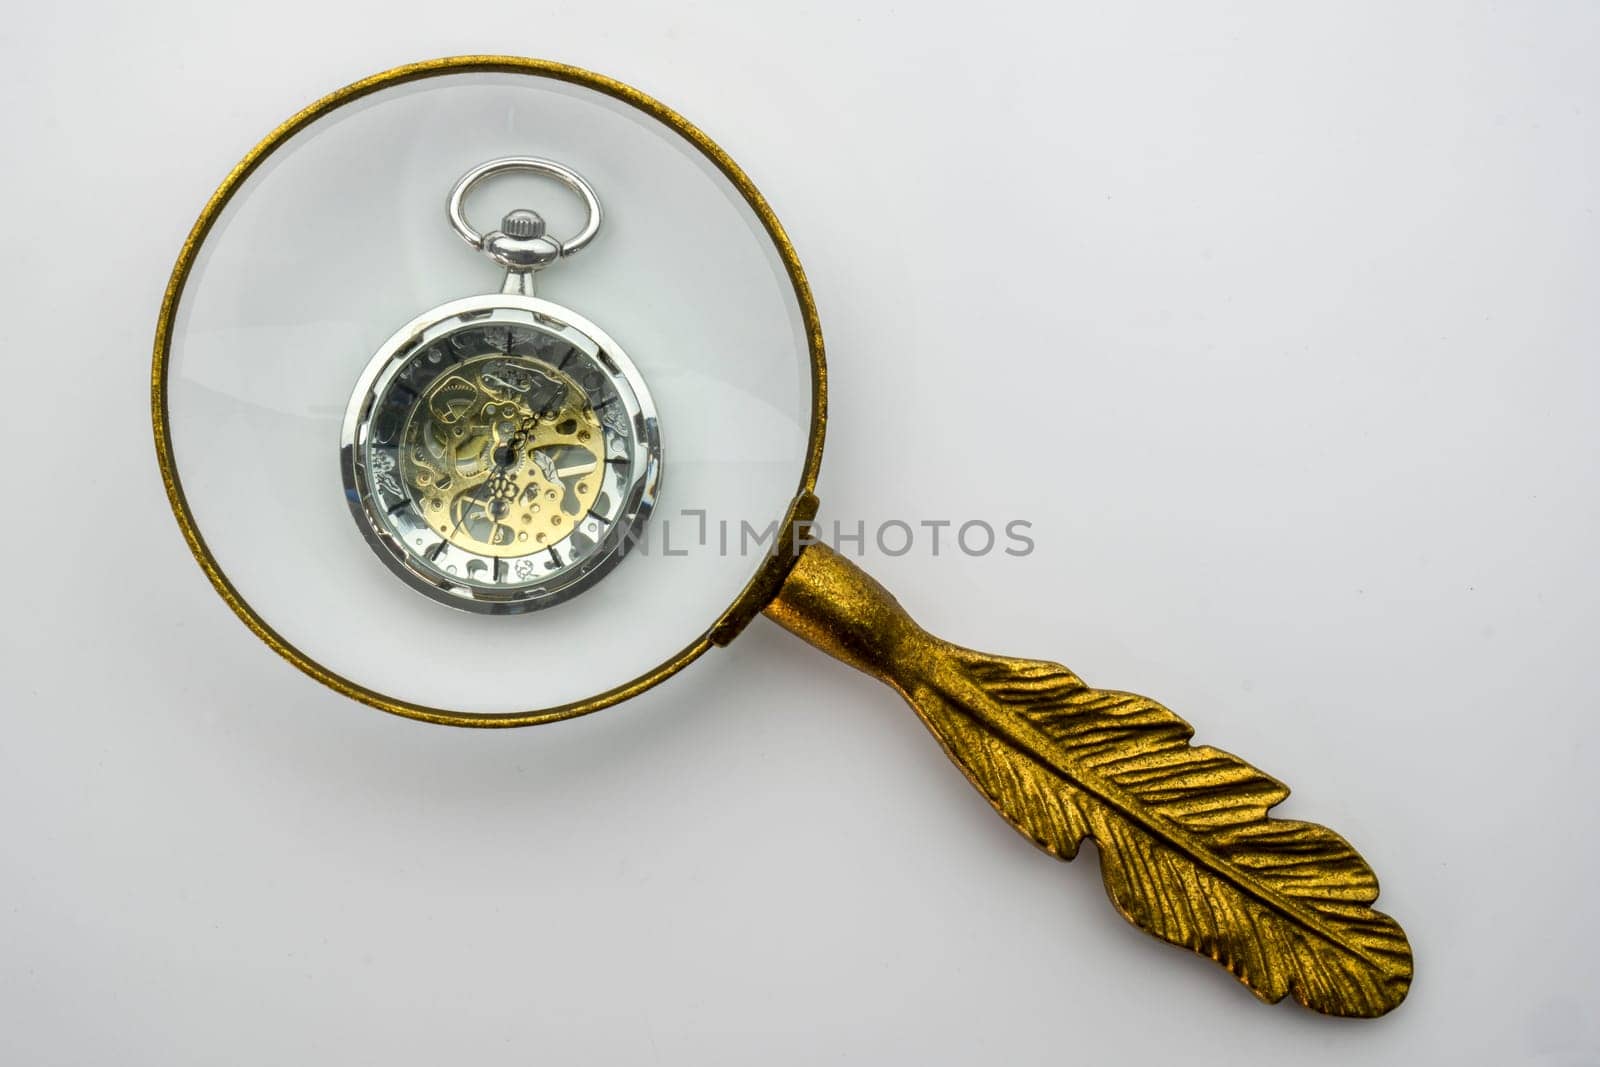 Gold handled magnifying glass viewing a silver modern pocket watch with visible gears, isolated on white background. High quality photo